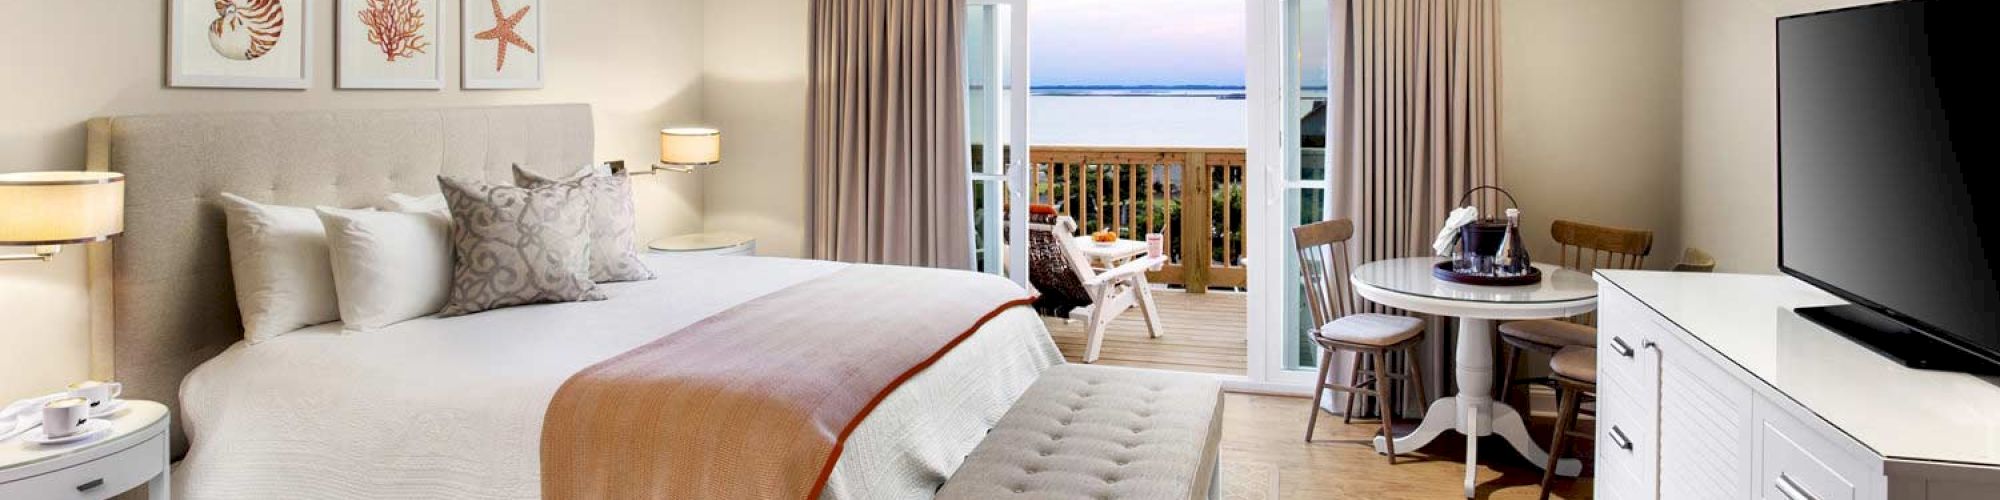 Sanderling Resort's cozy hotel guest room with a bed, artwork, TV, and a sunrise balcony overlooking the atlantic ocean.